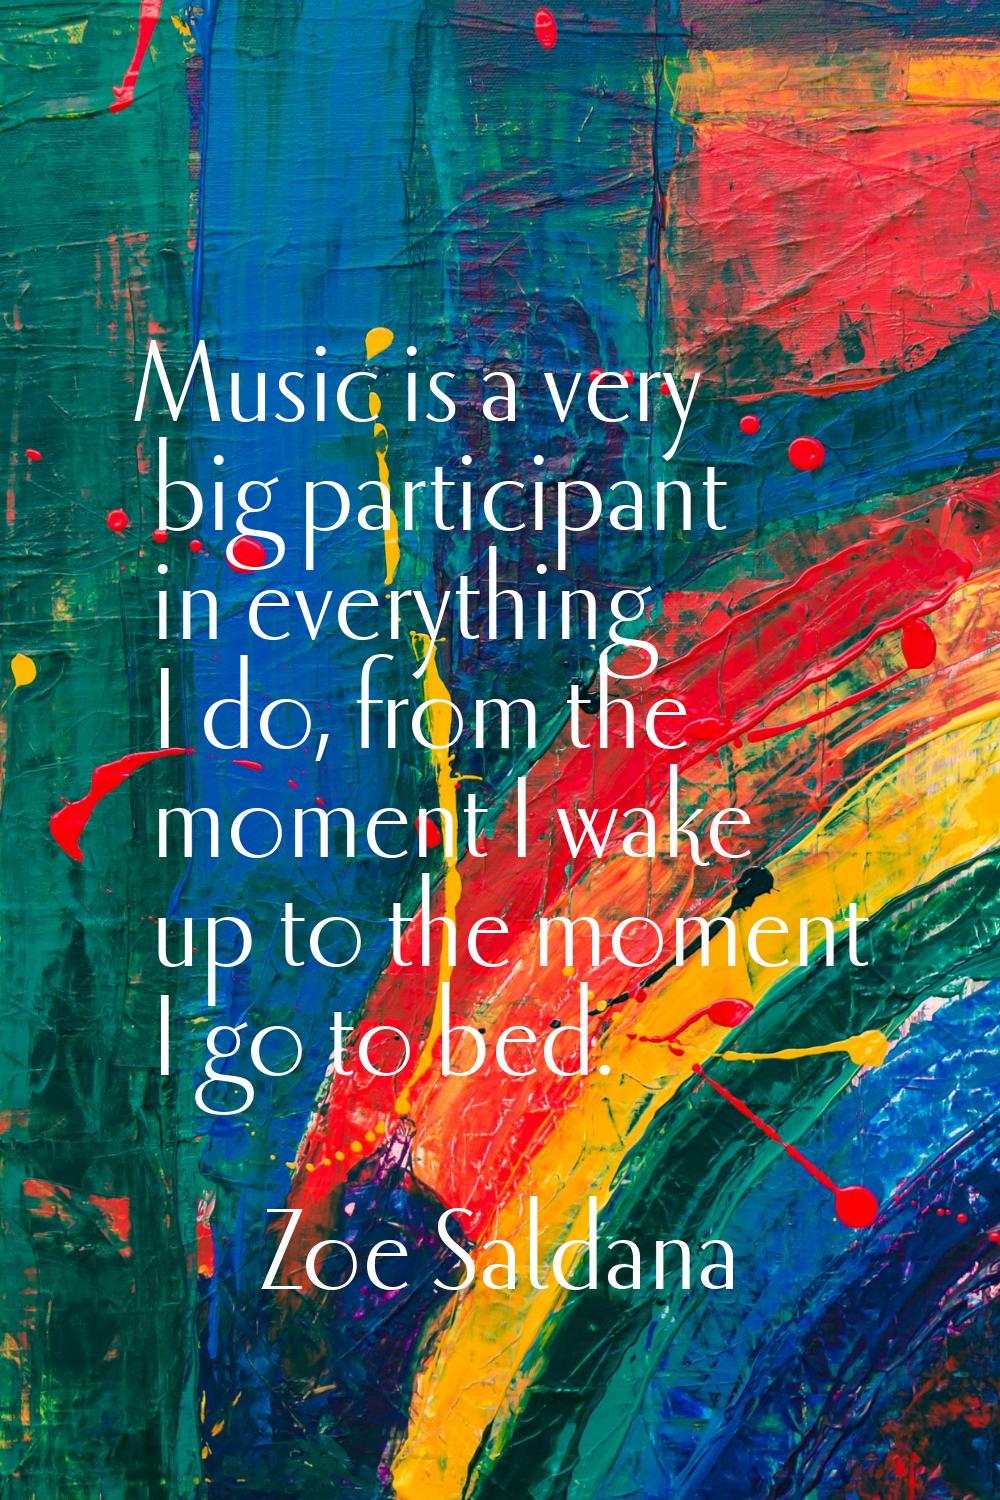 Music is a very big participant in everything I do, from the moment I wake up to the moment I go to